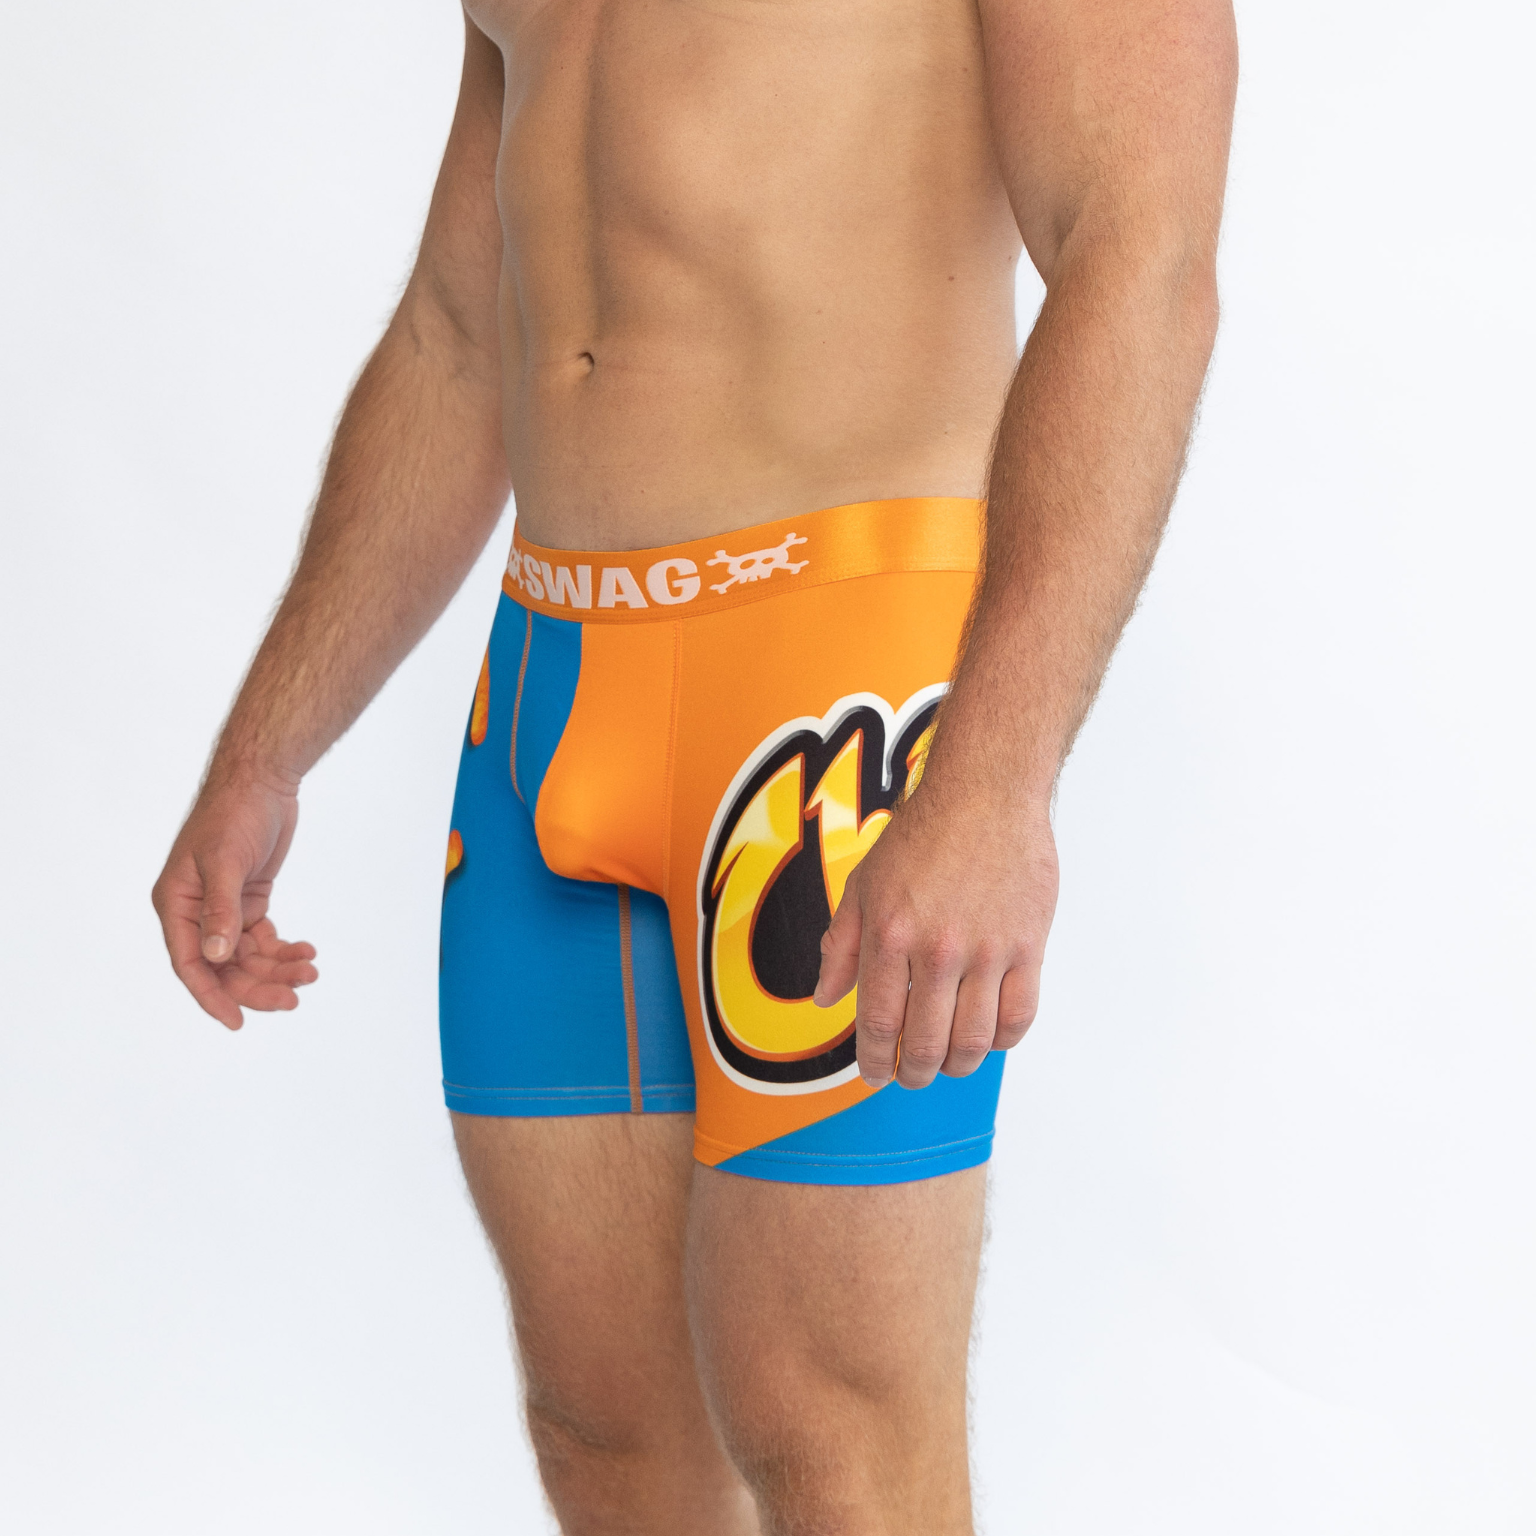 Swag Boxers Australia Reviews  Read Customer Service Reviews of  swagboxers.com.au